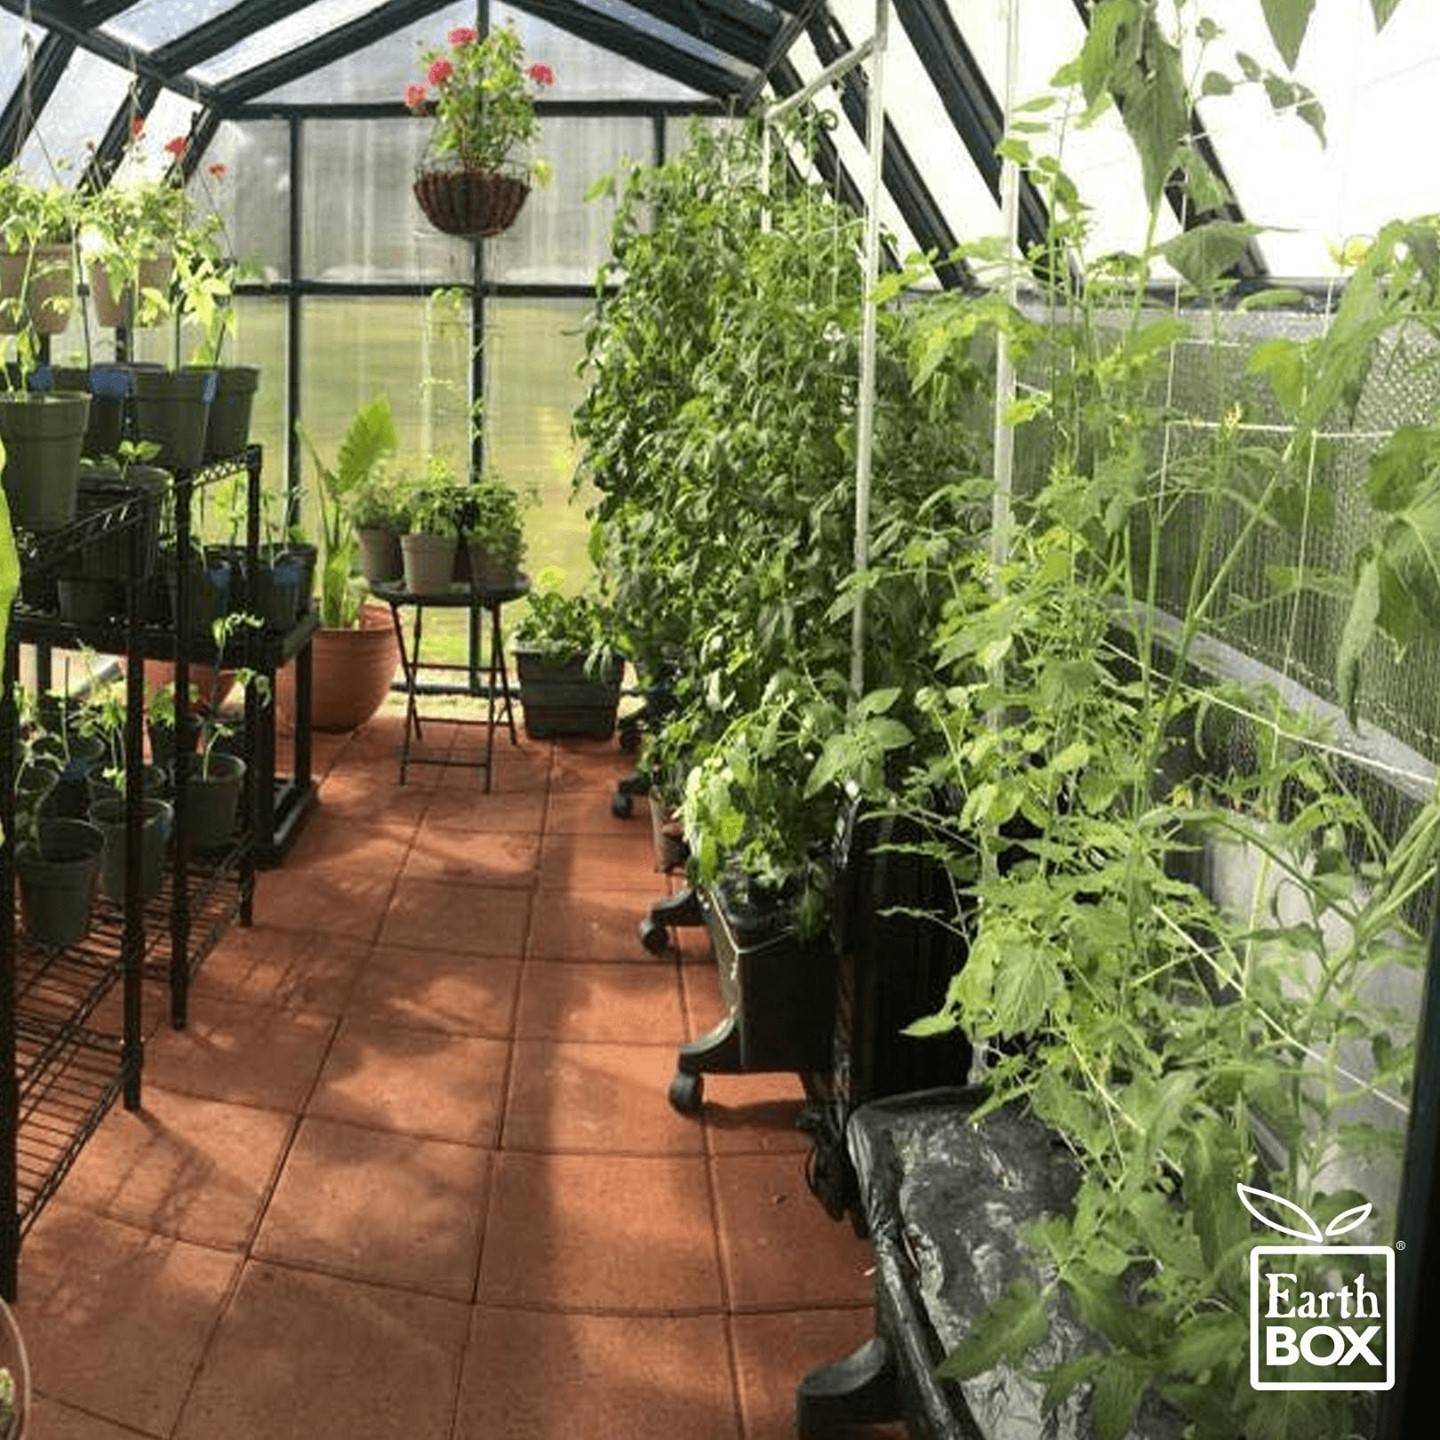 Greenhouse with various gardening containers